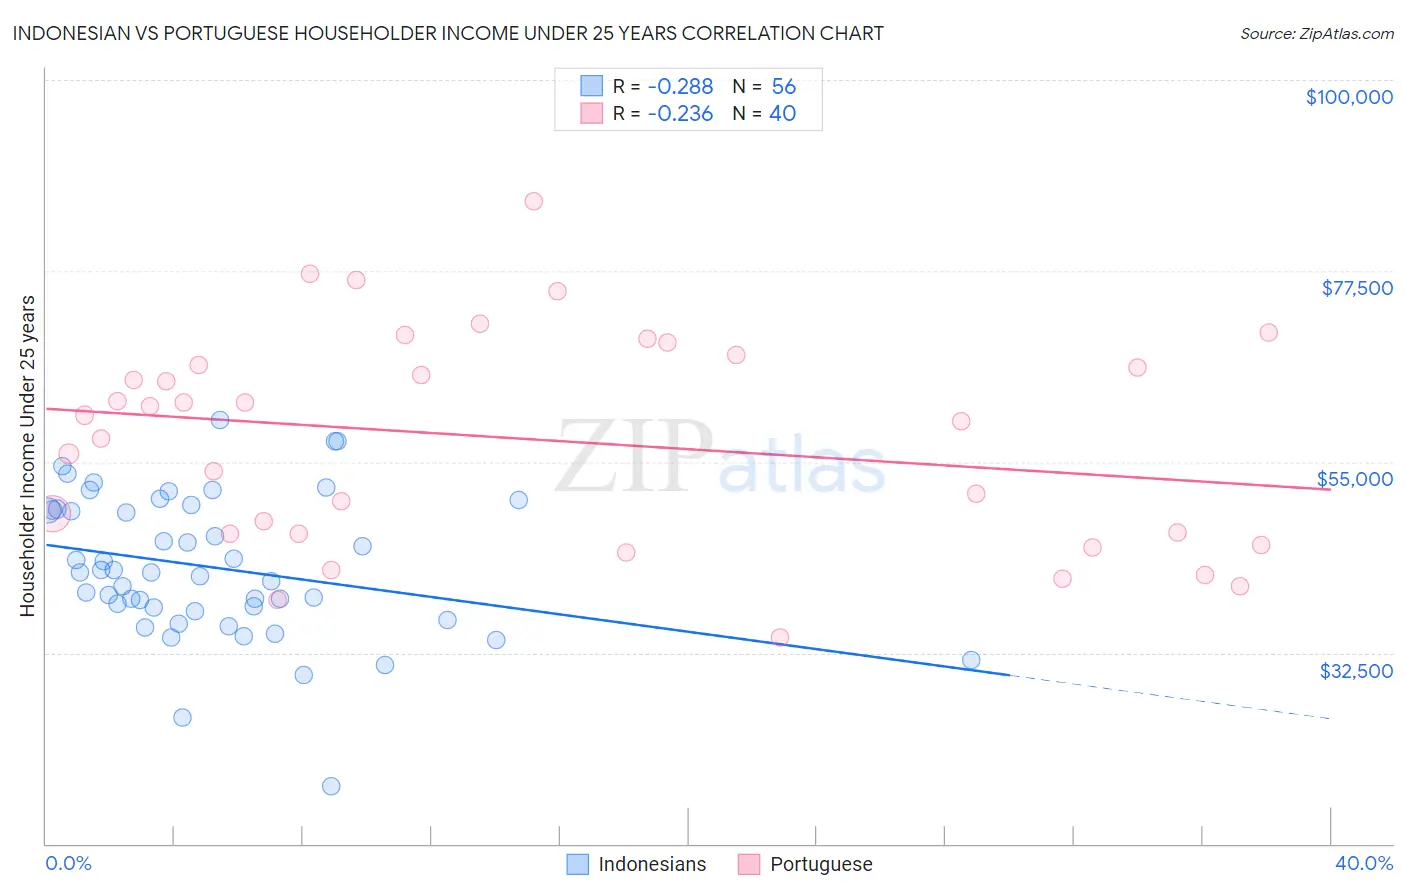 Indonesian vs Portuguese Householder Income Under 25 years